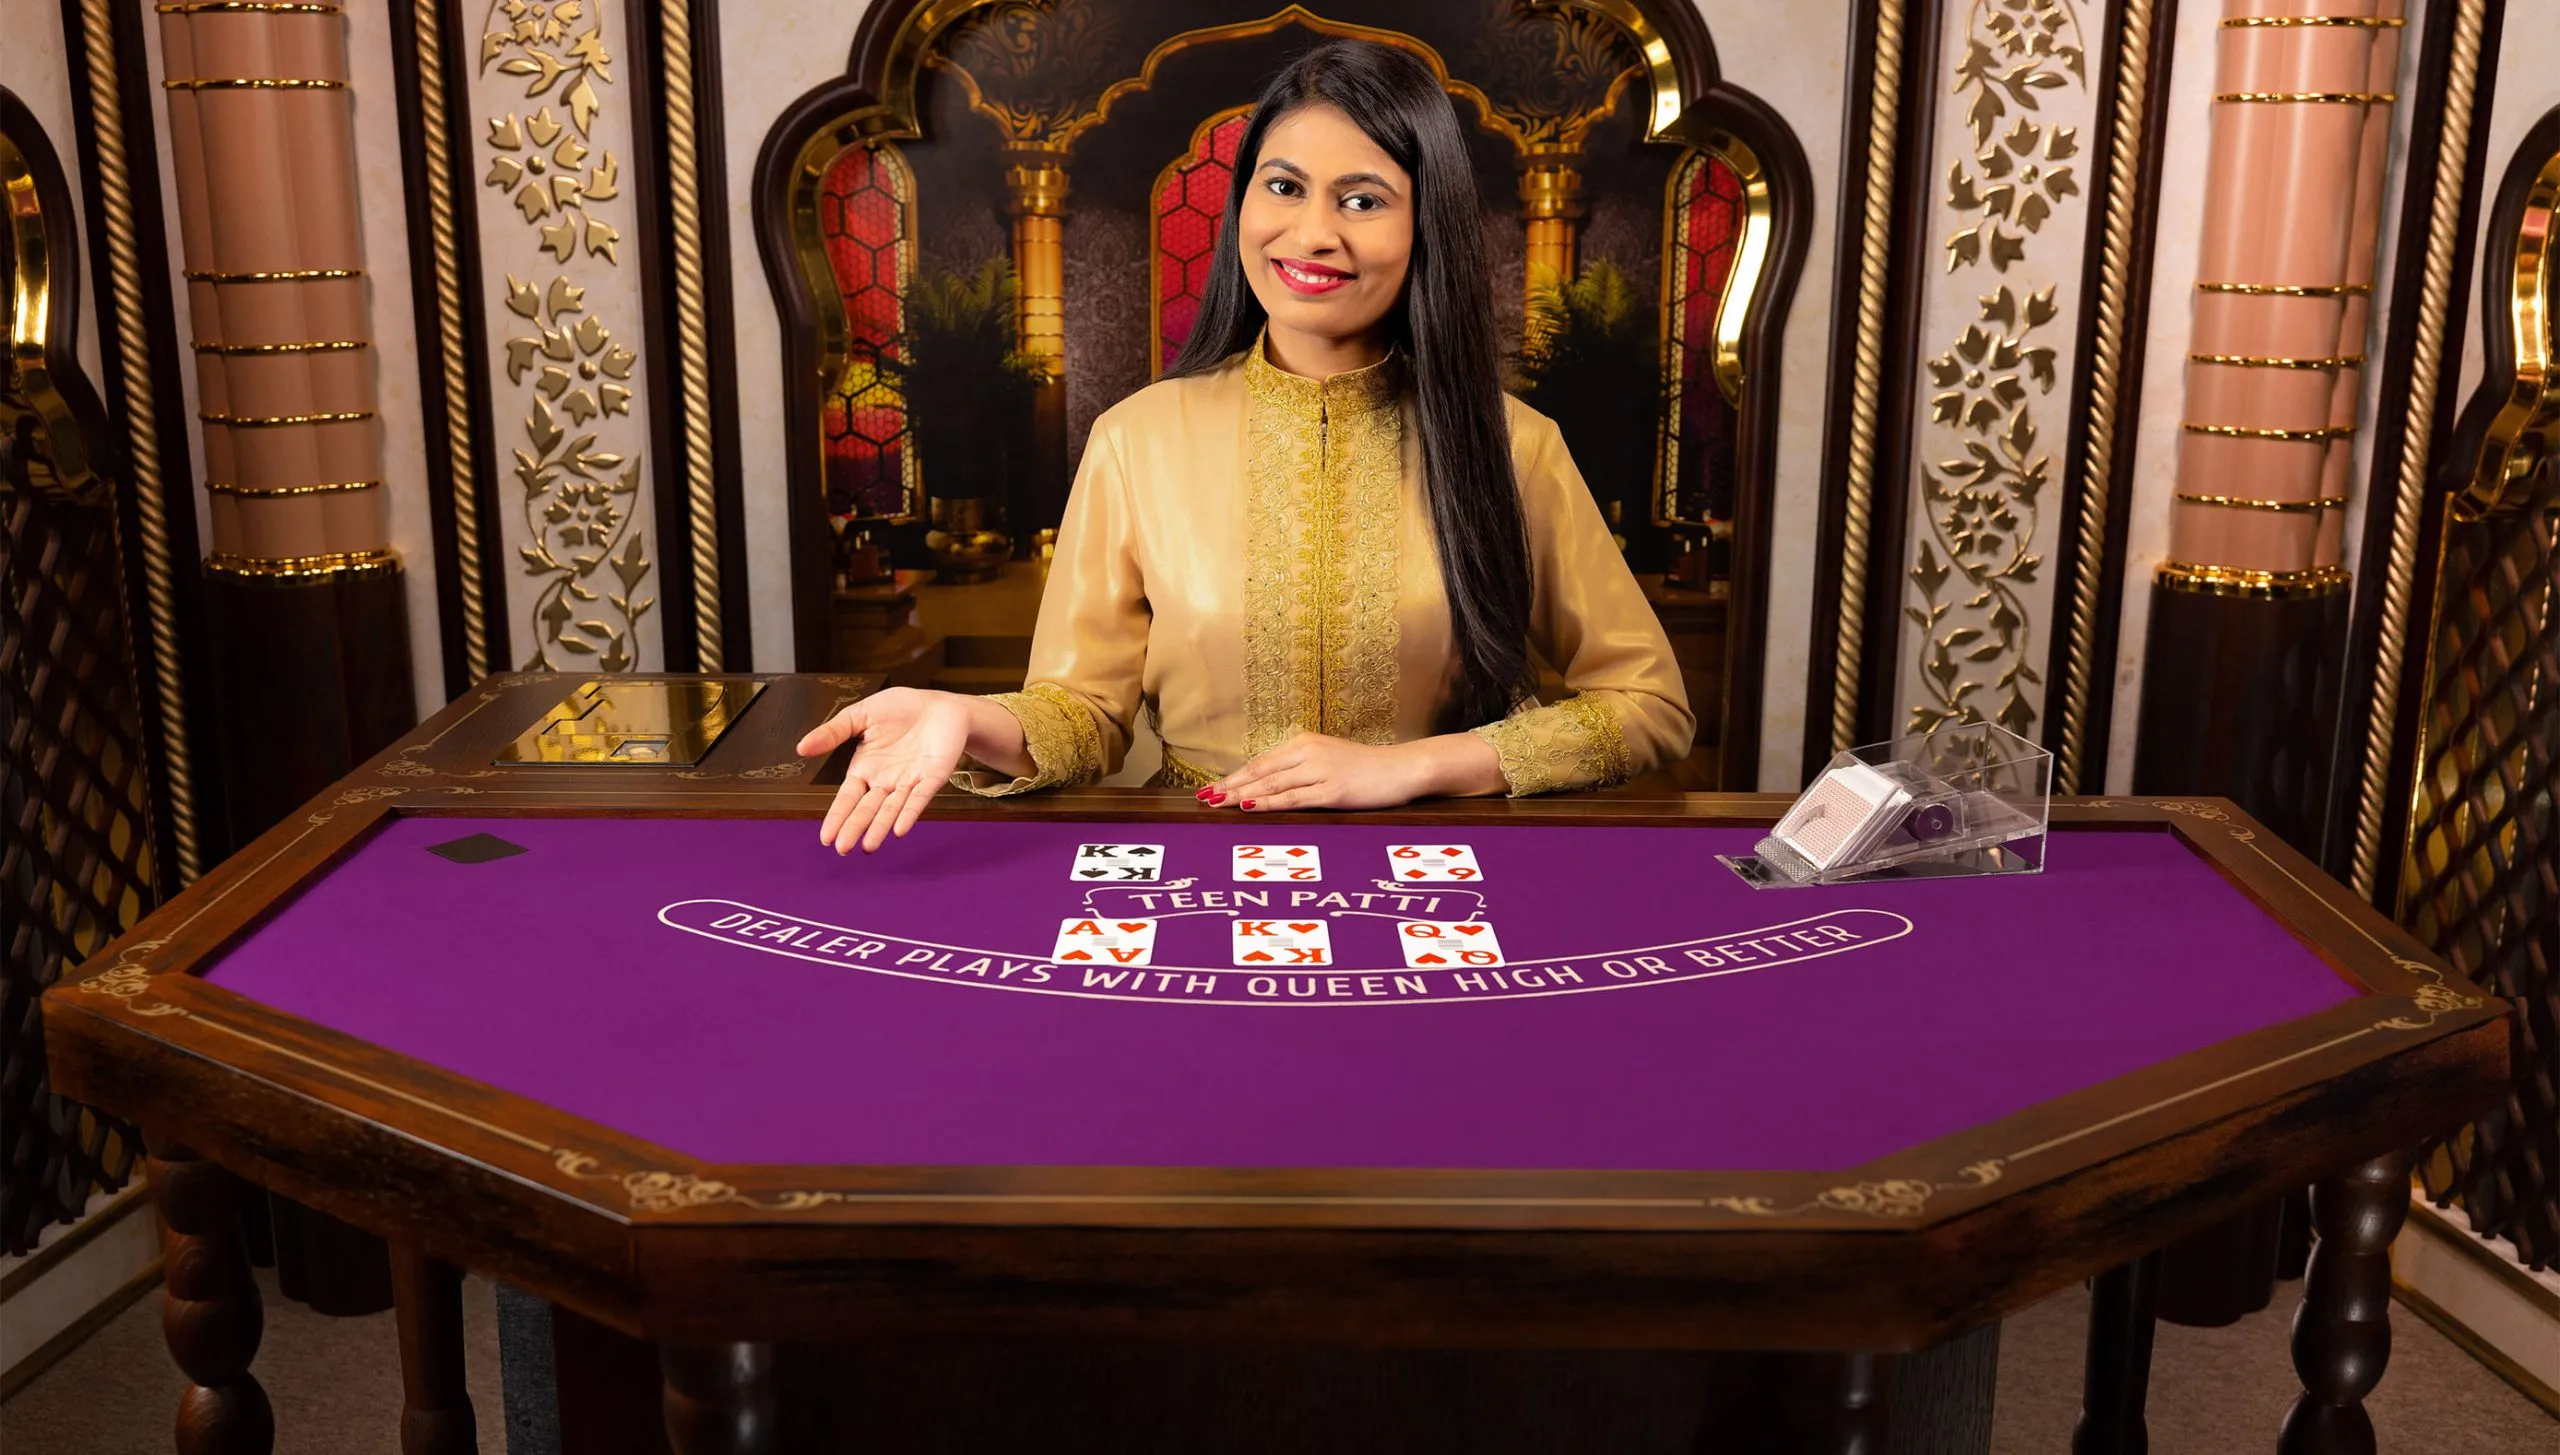 What Are the Key Differences Between Online Poker and Teen Patti?